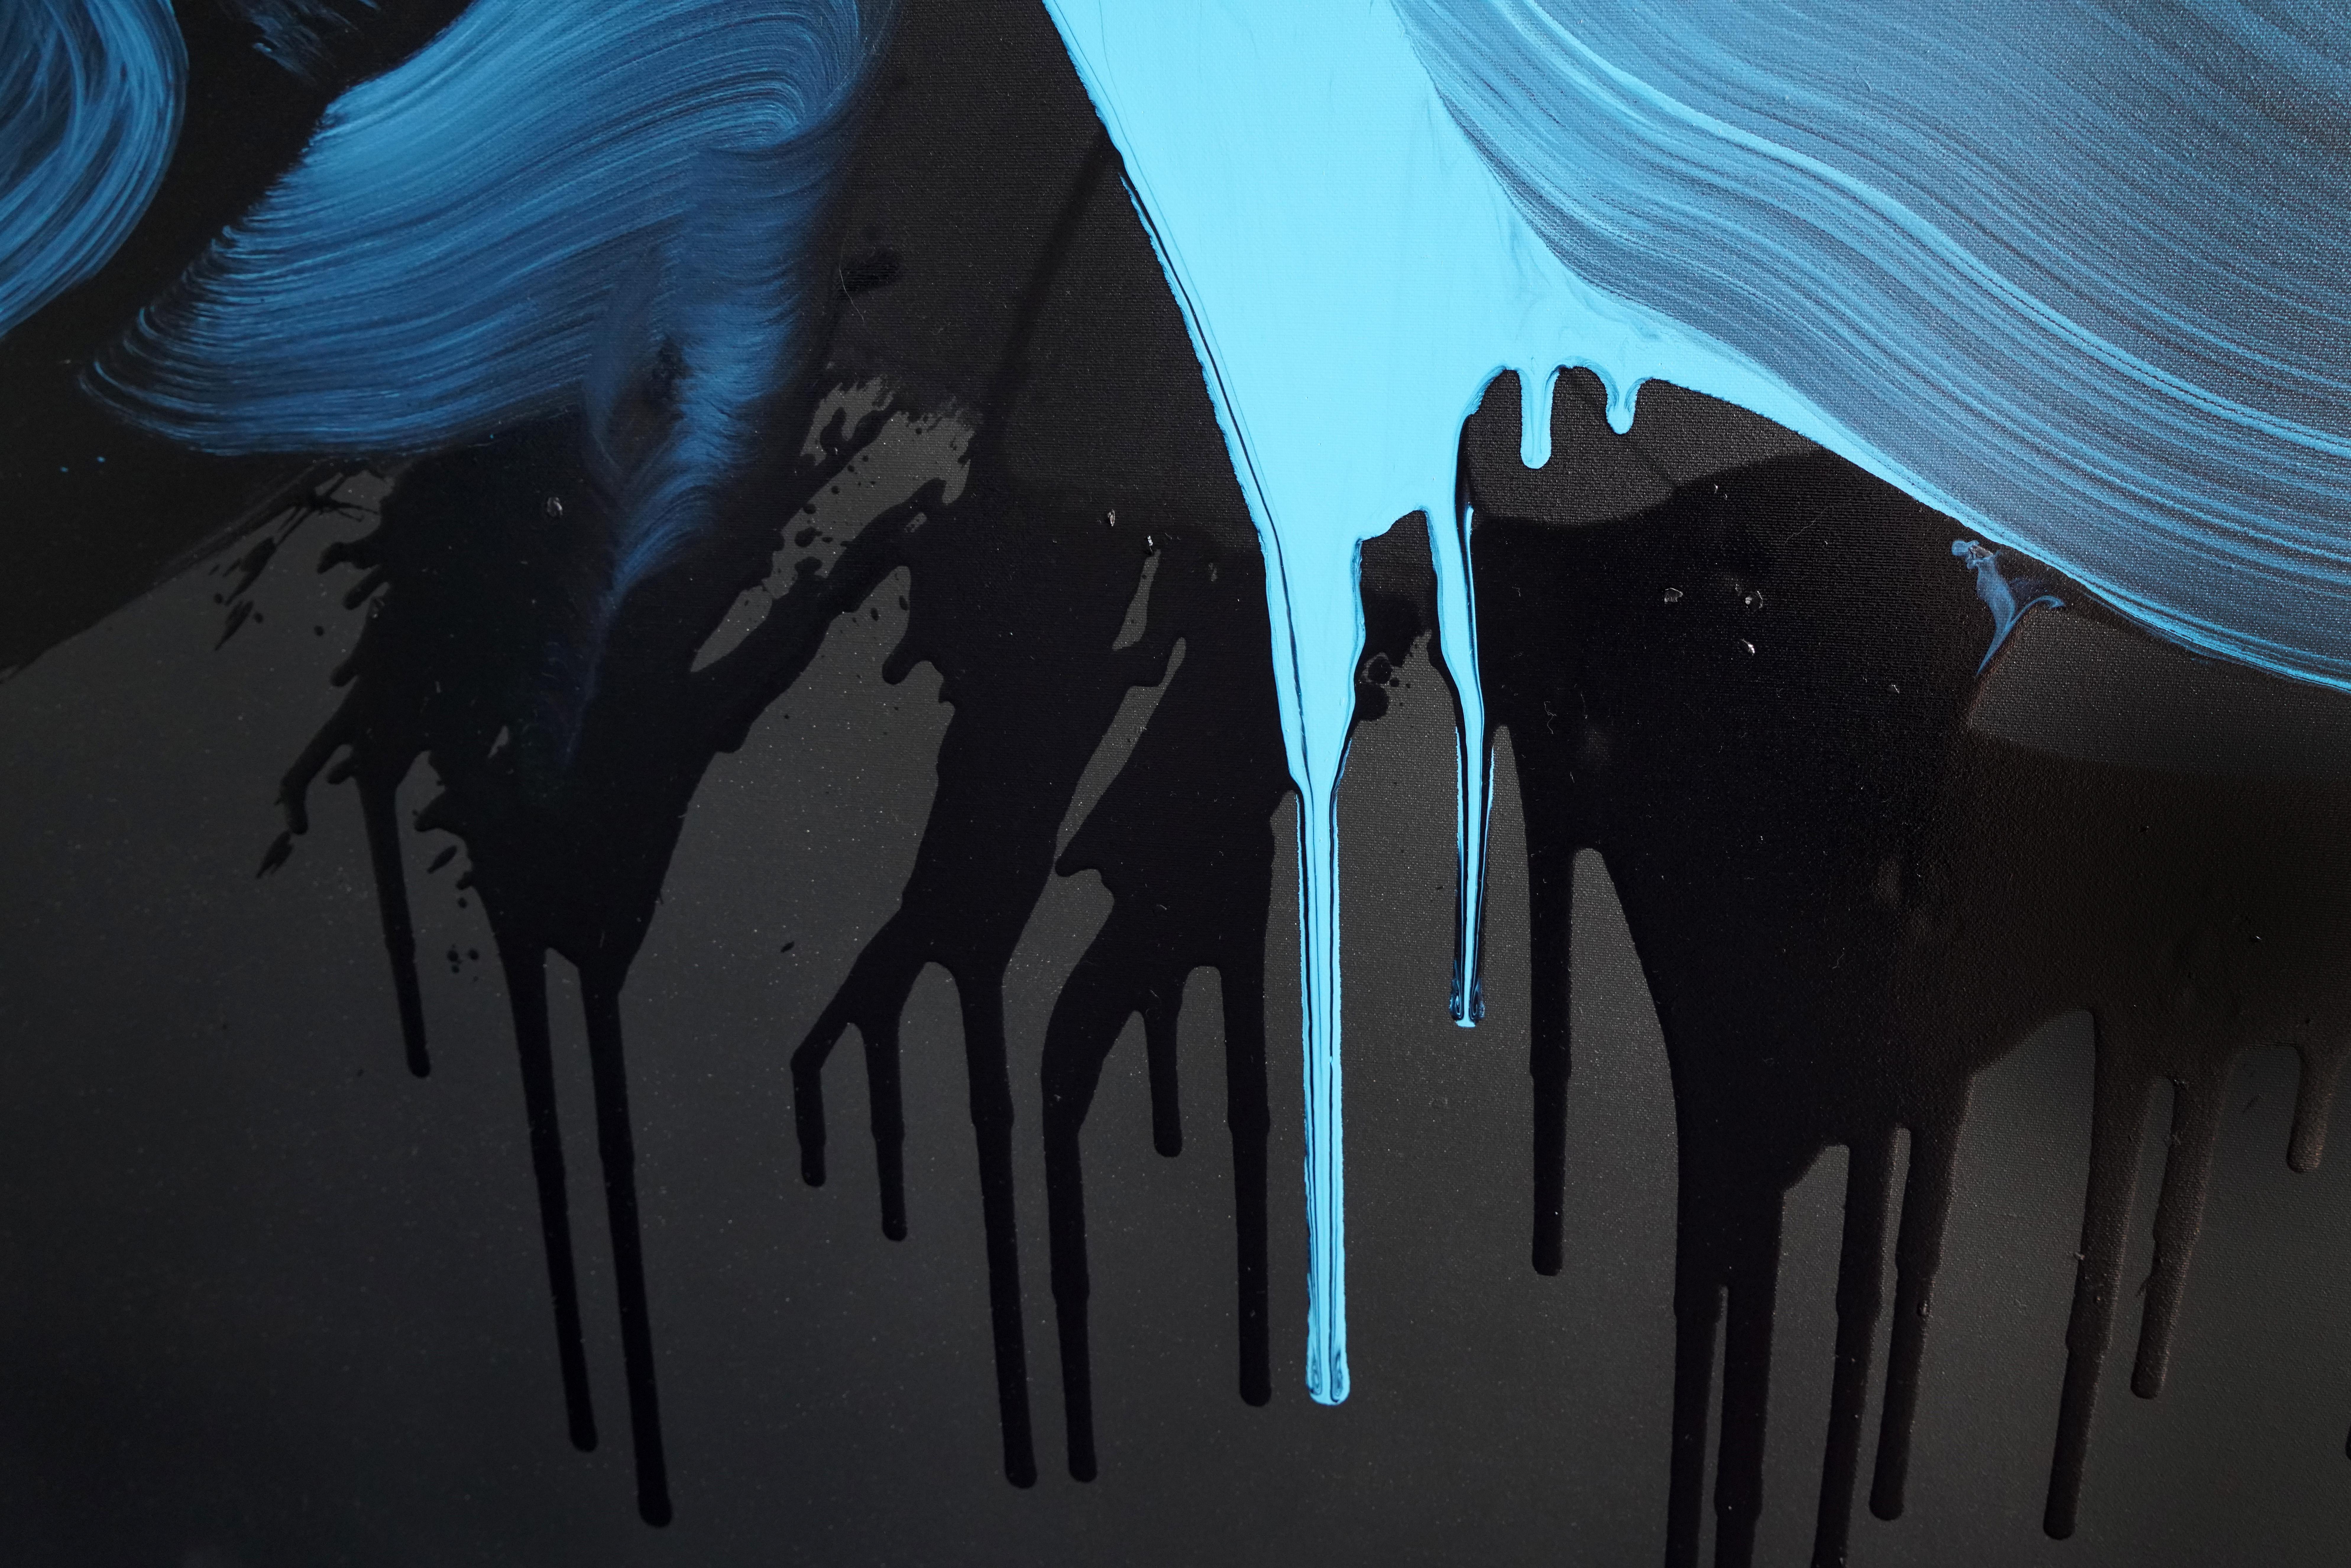 Grzegorz Radecki is a Professor at the Academy of Fine Arts in Gdansk, Poland. 

Artist about  his work:

BLOBS. THE CHARM OF DRIPPING PAINT

Flowing peacefully in the slow current of a narrow trickle between the feeling of senselessness and some